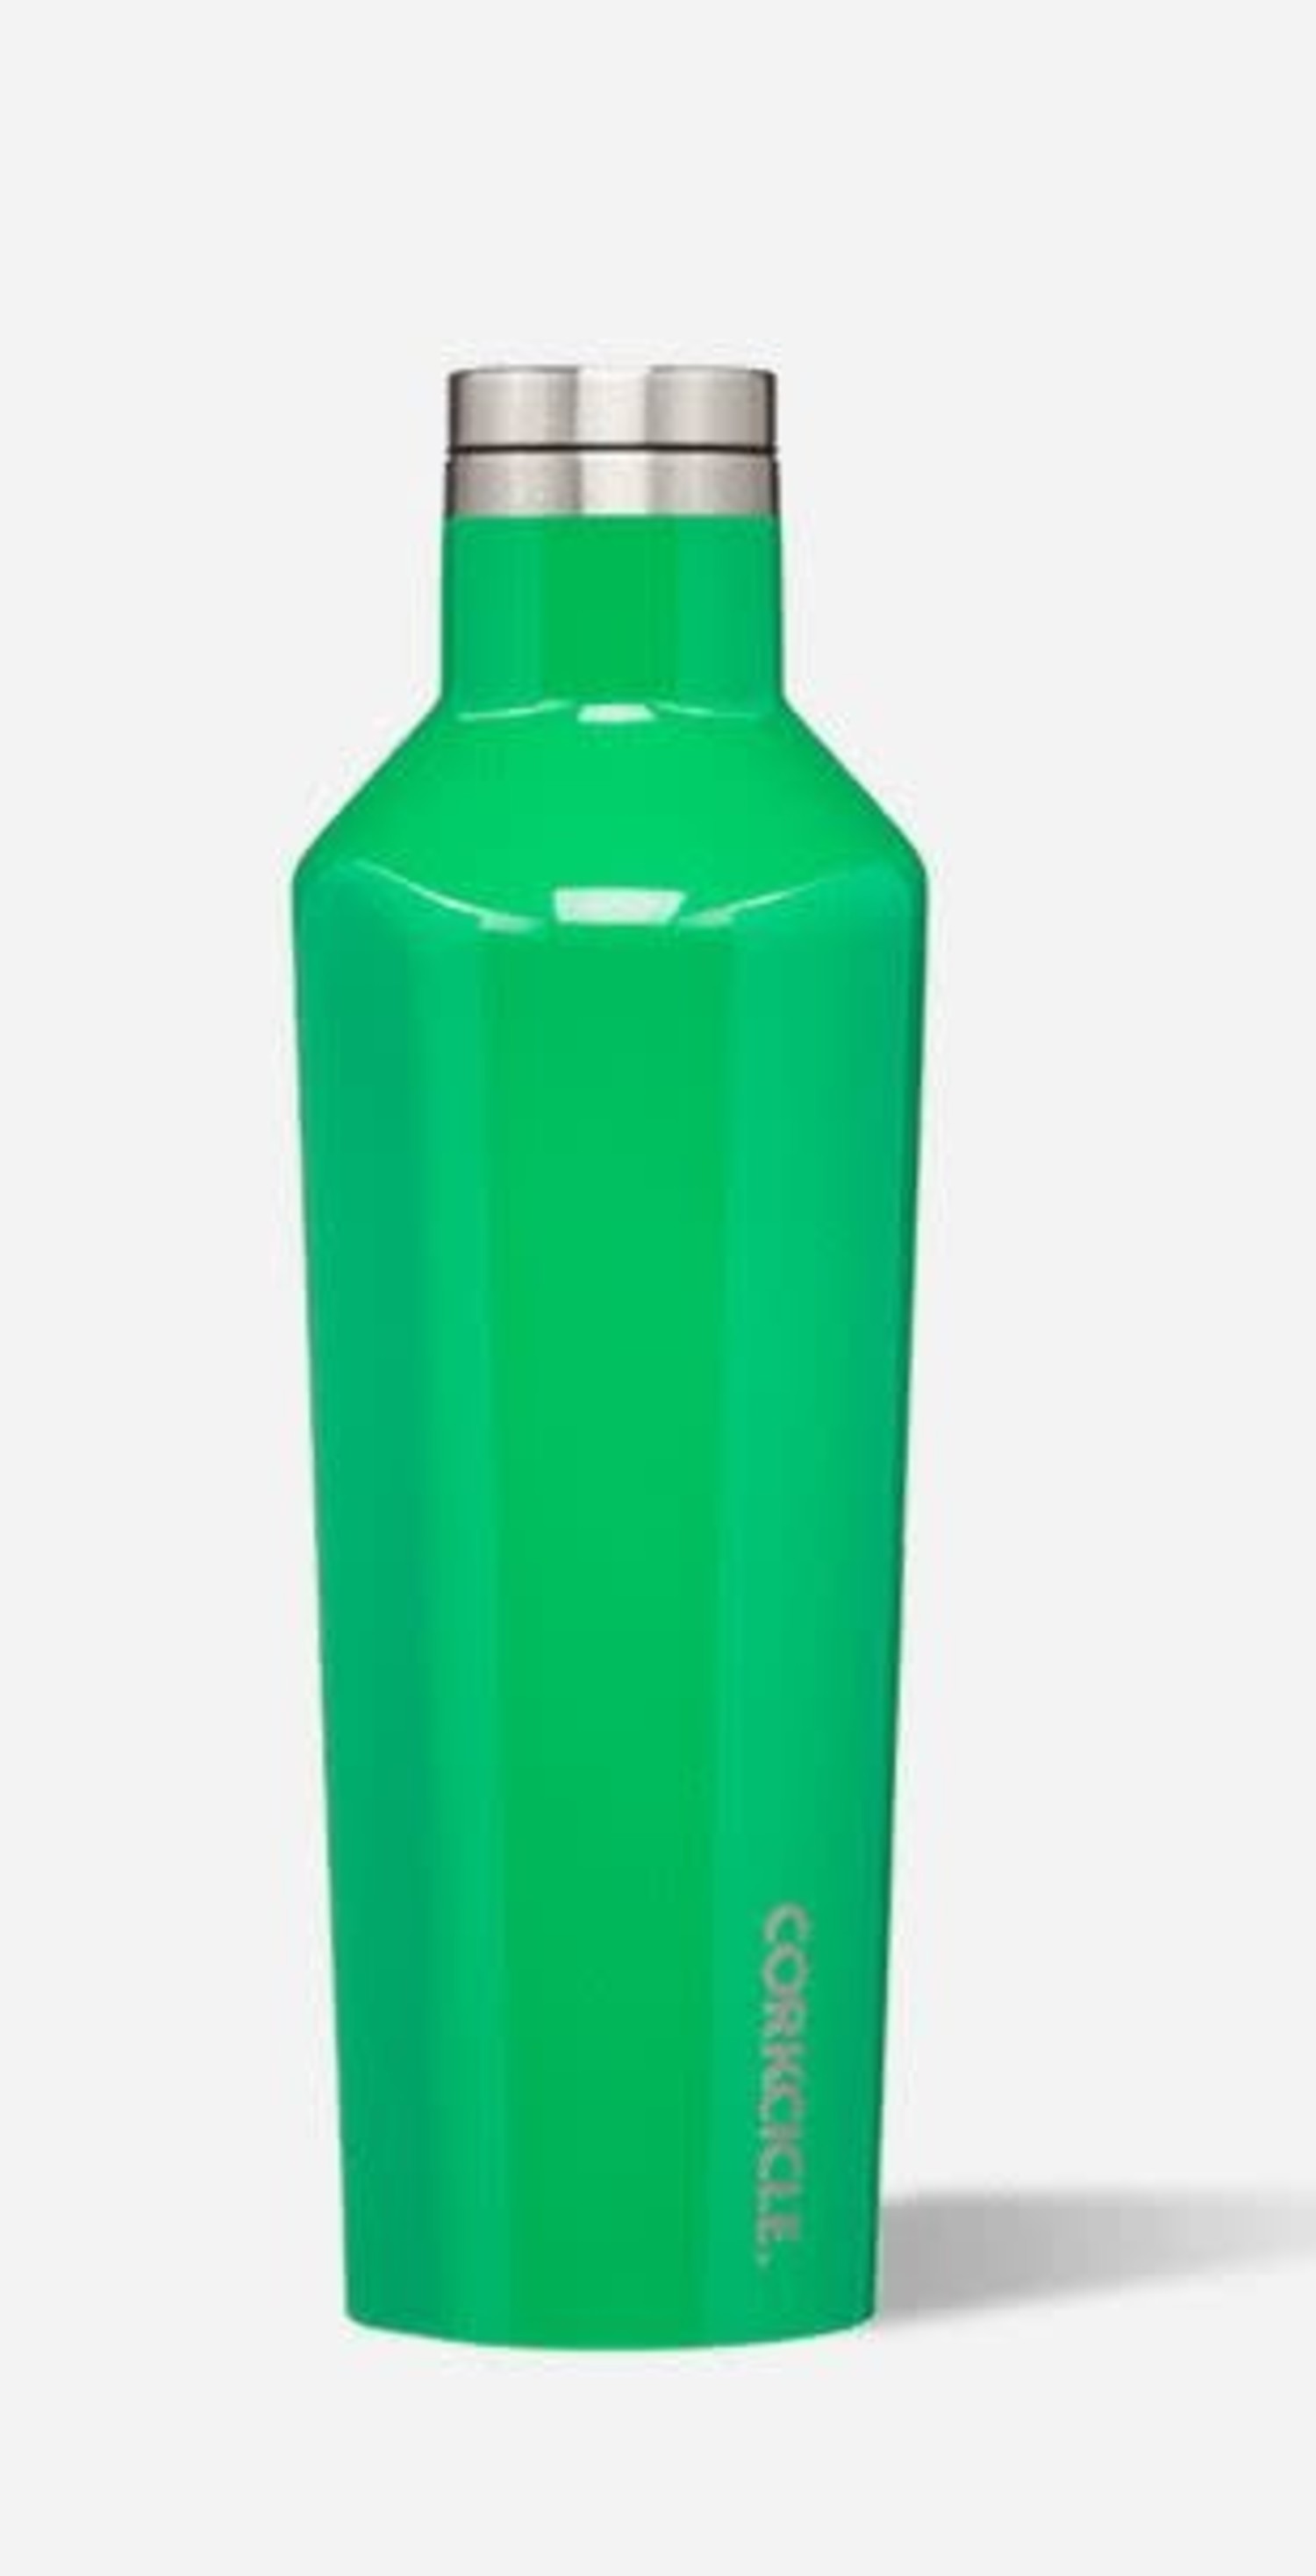 Corkcicle Canteen - 25 oz. Gloss Turquoise